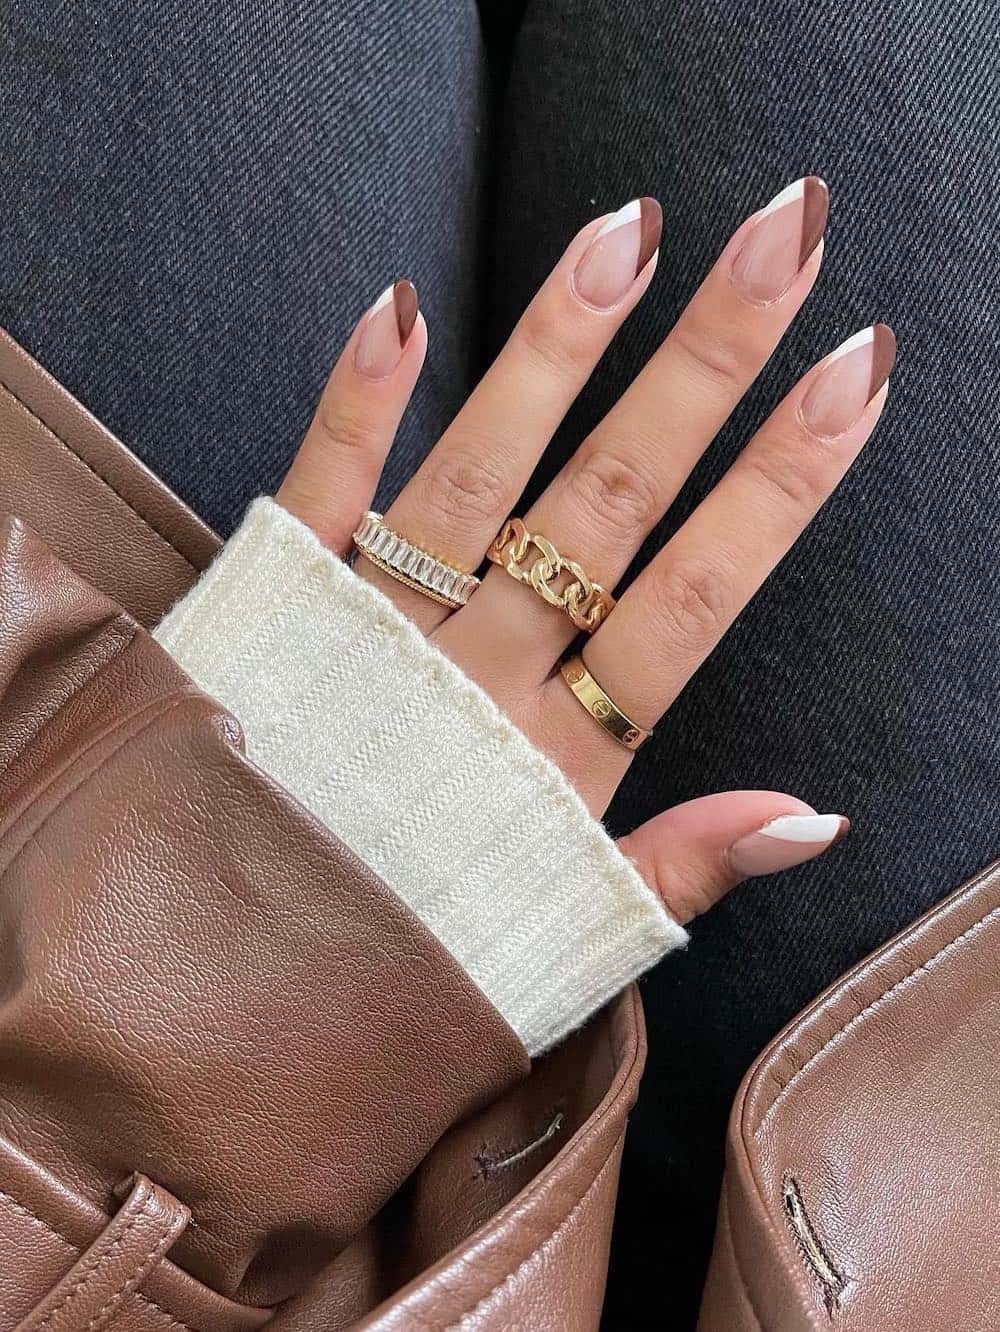 A hand with medium-length almond nails painted a glossy nude with white and brown slanted French tips